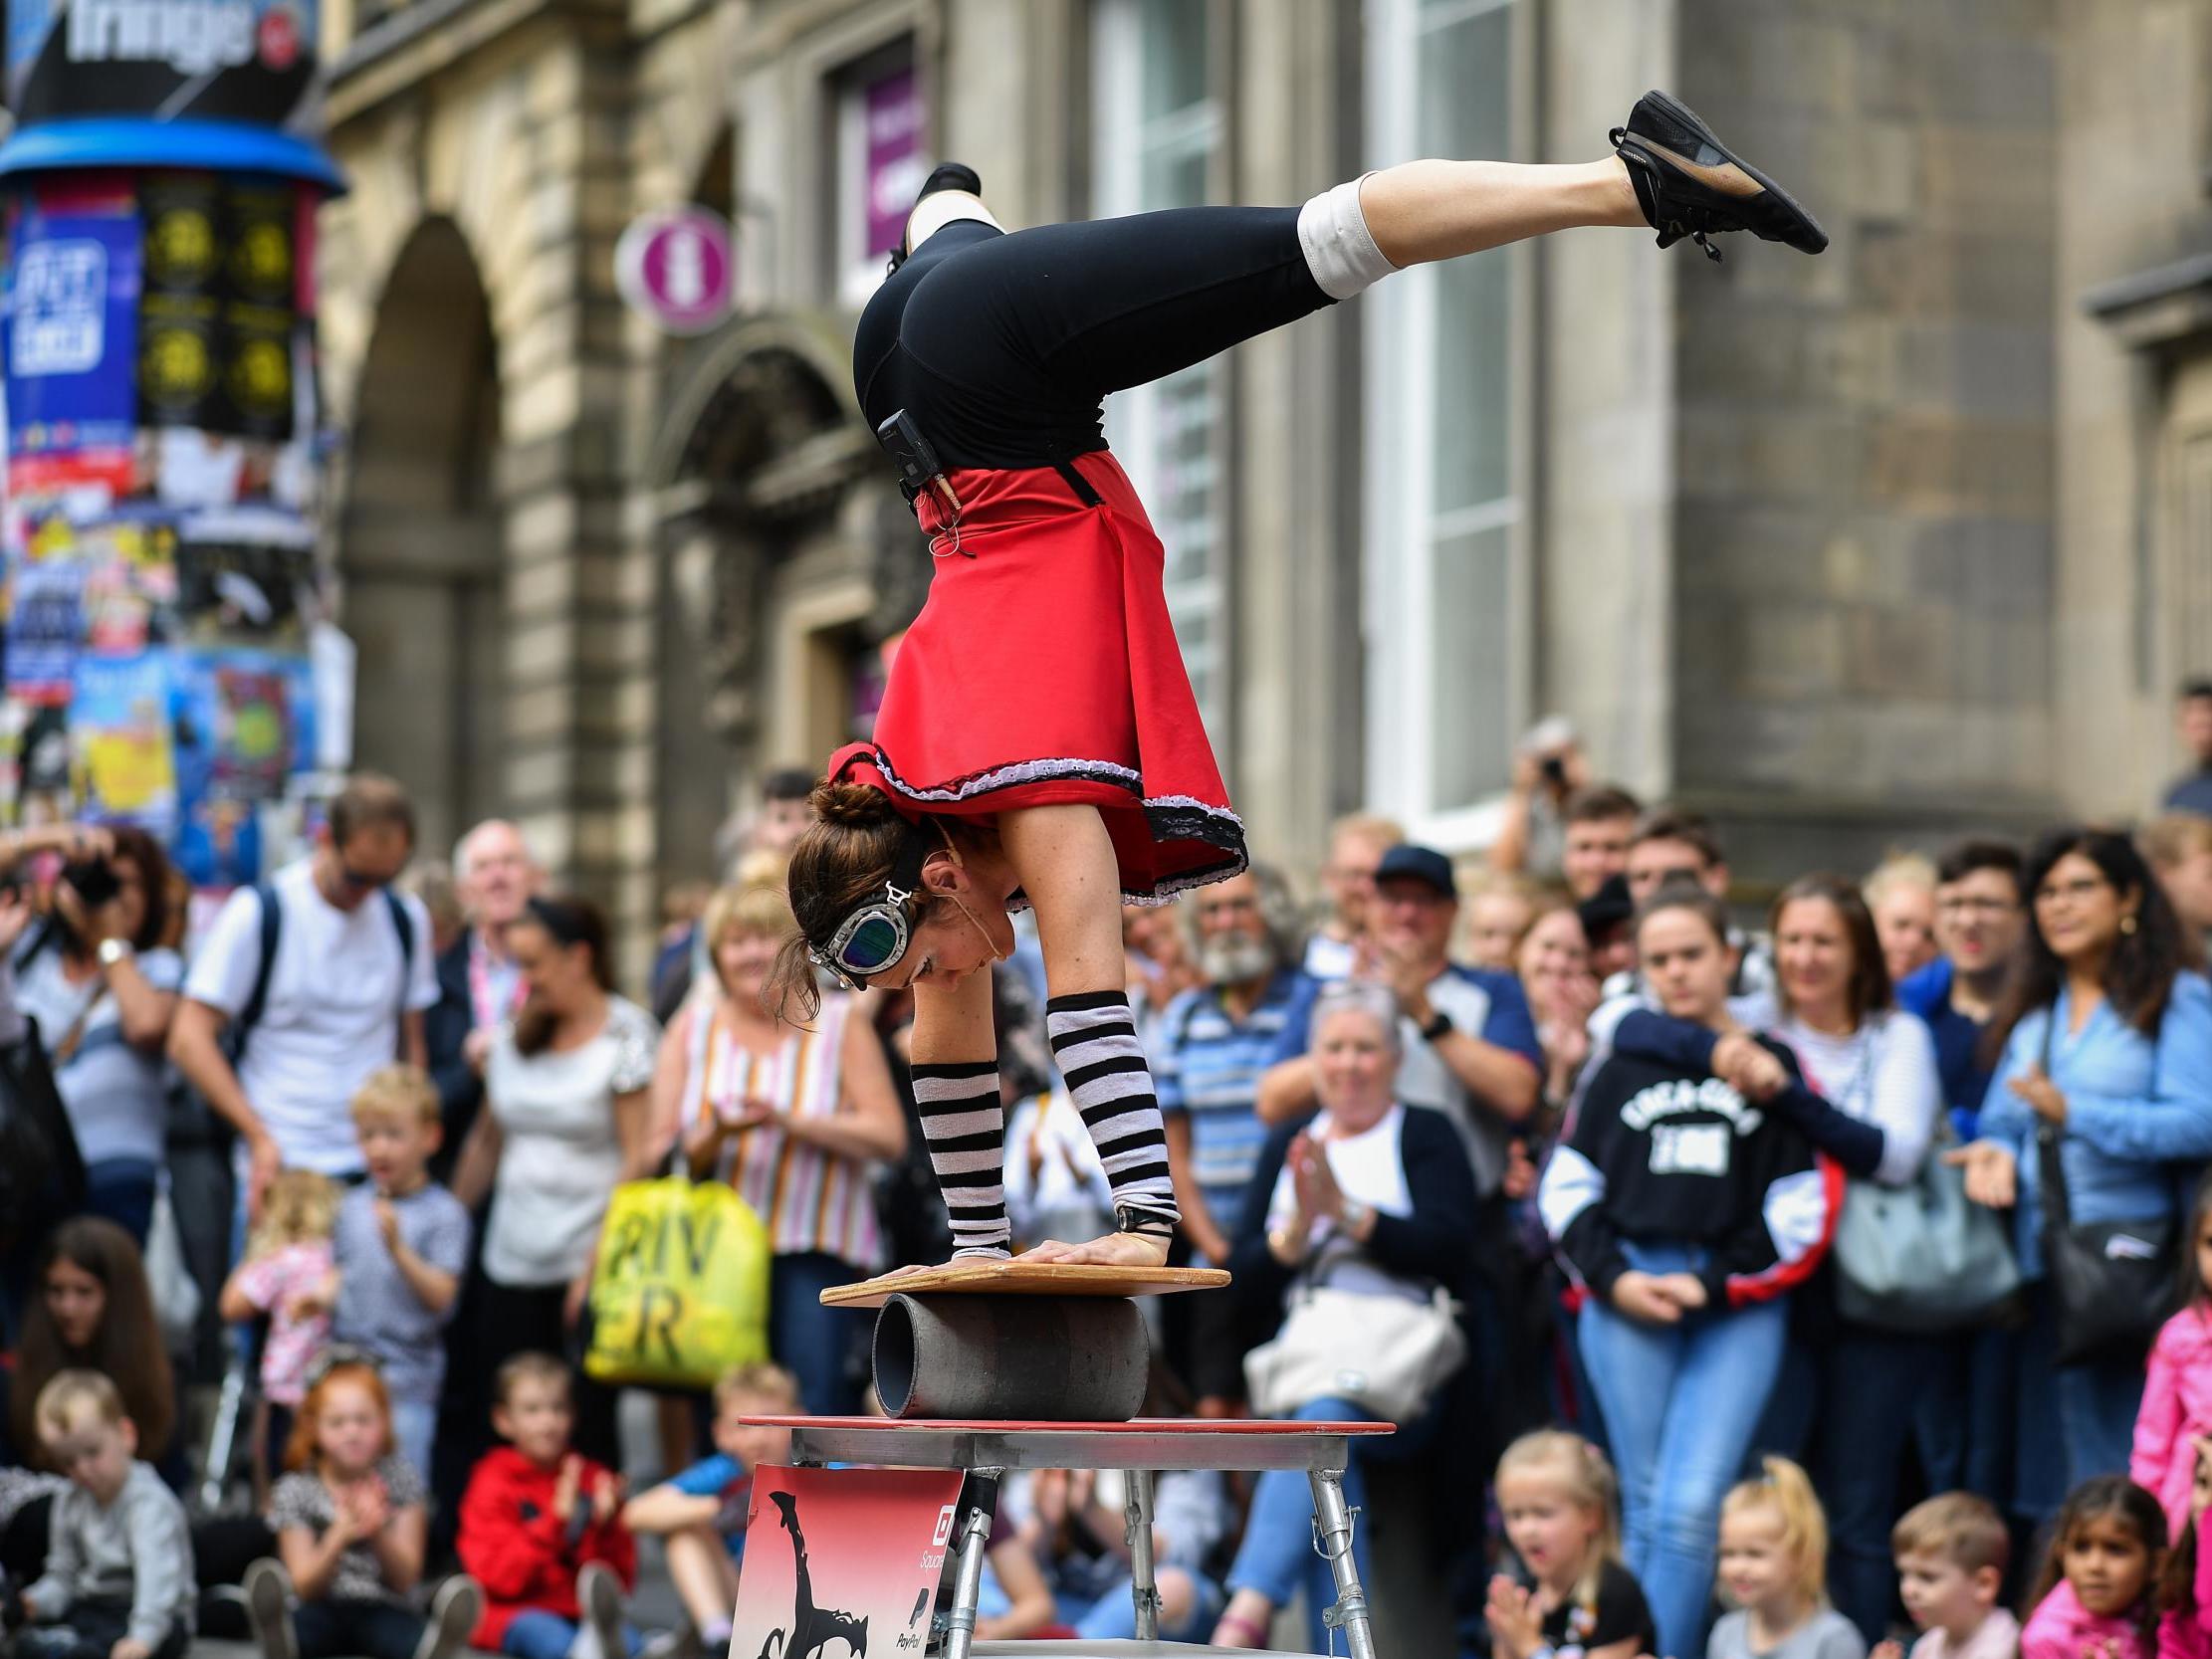 Edinburgh's Royal Mile in August is usually full of people flyering and street performers